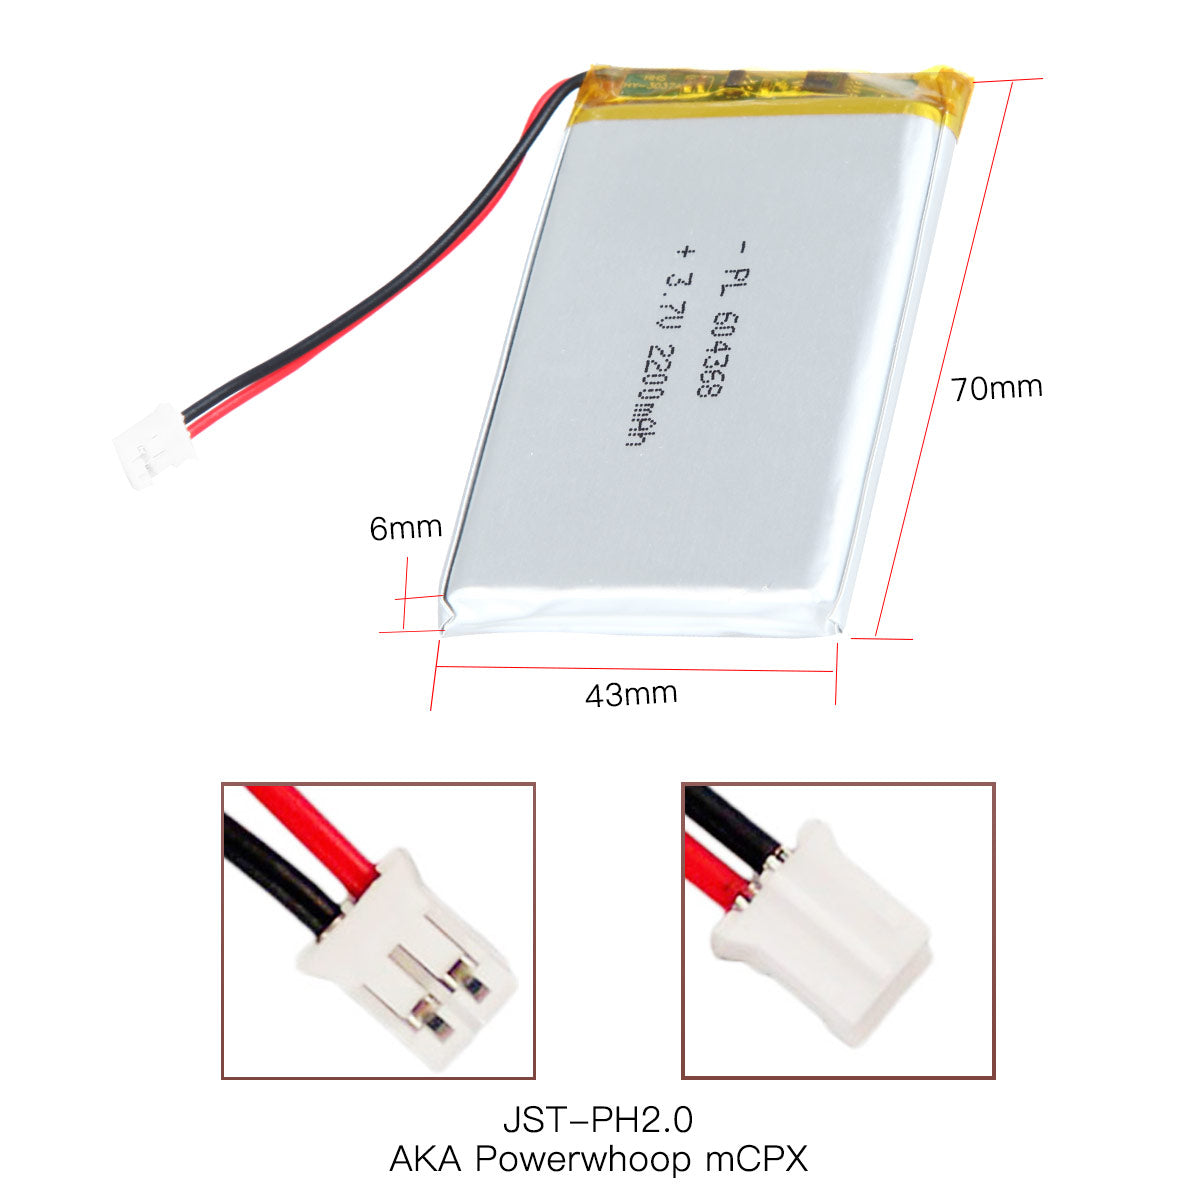 YDL 3.7V 2200mAh 903462 Rechargeable Lithium Polymer Battery